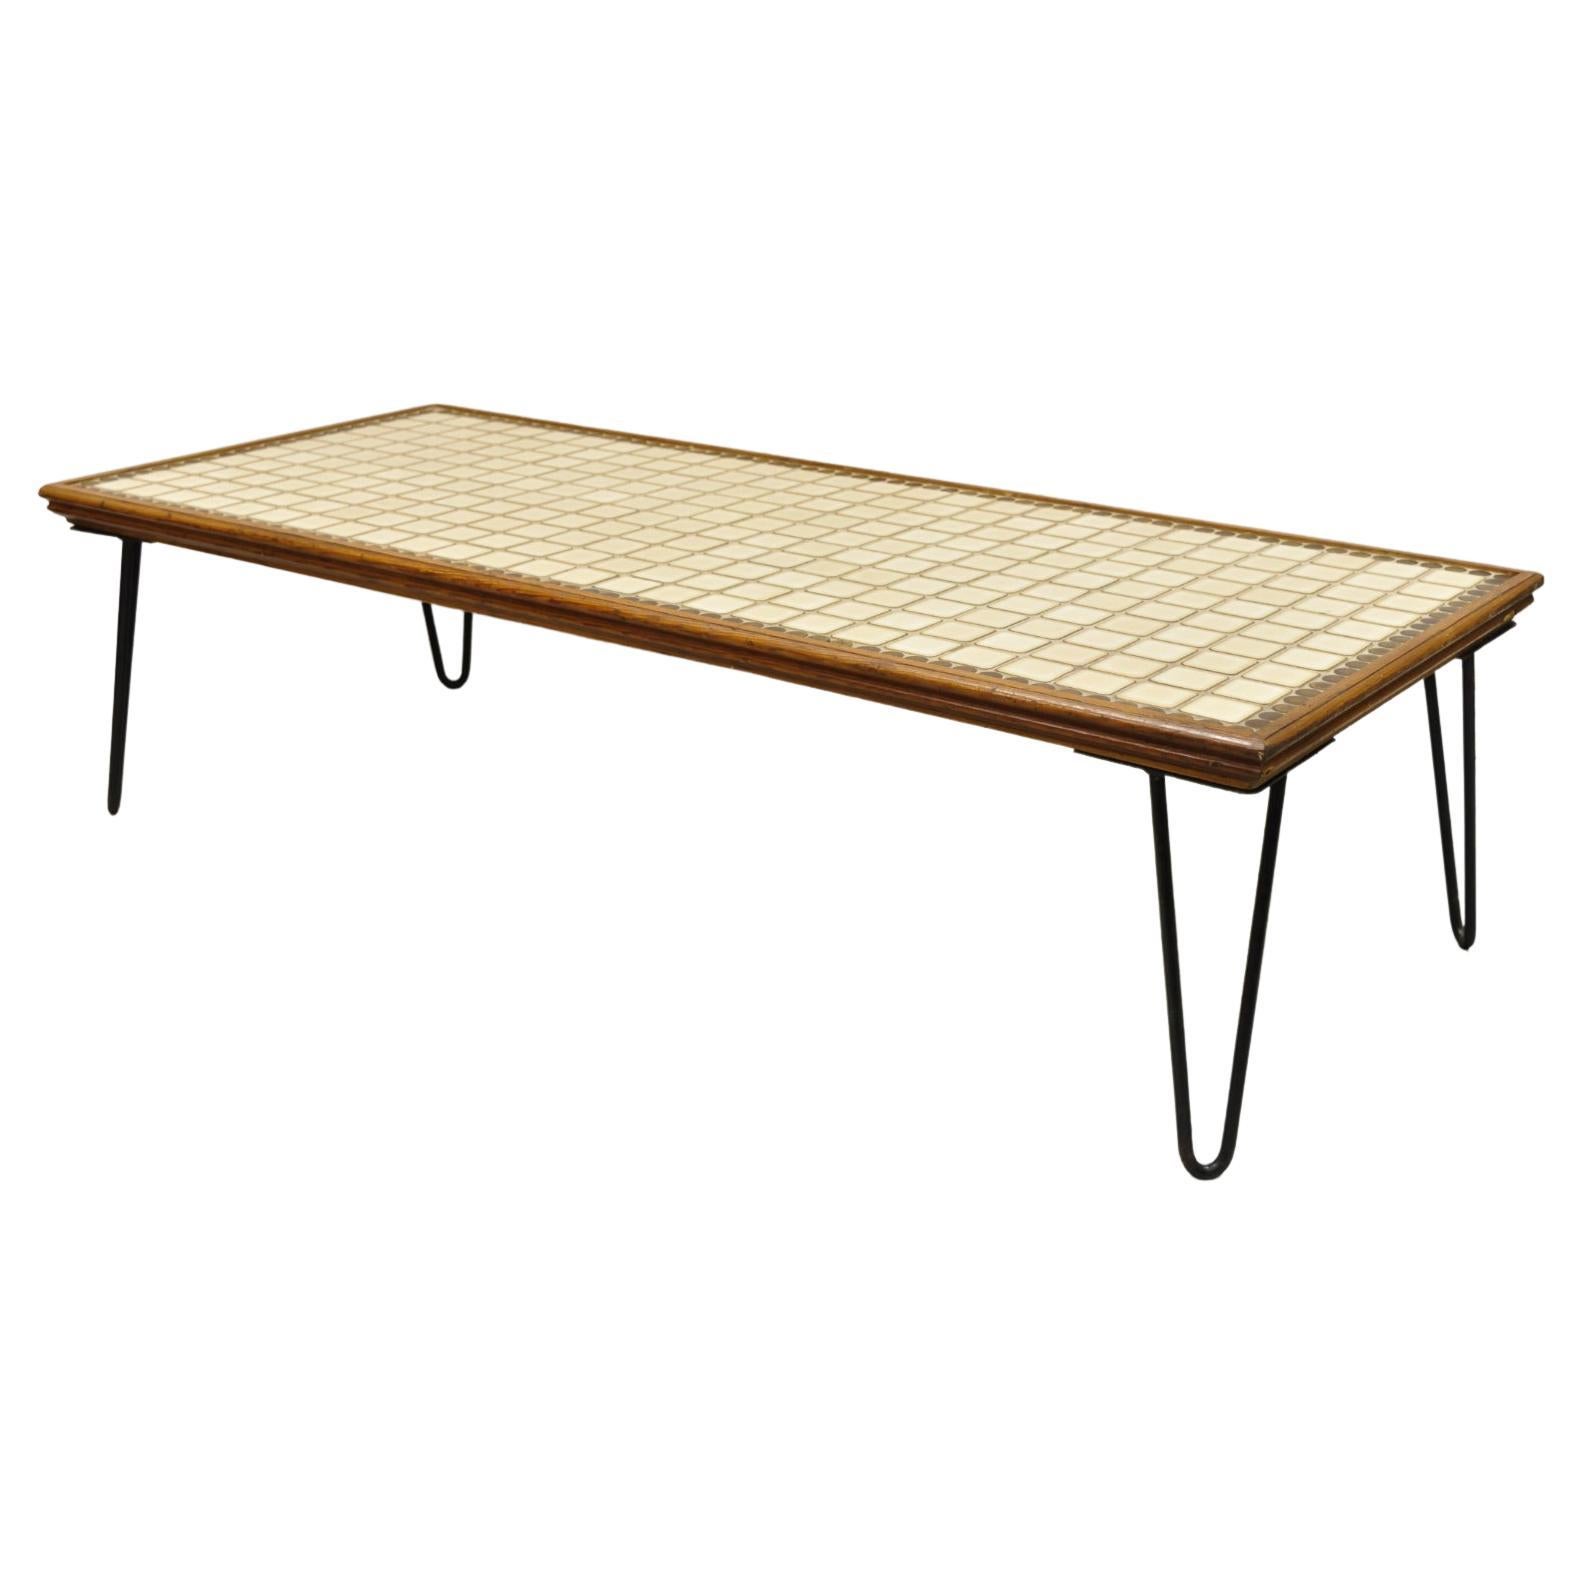 Vintage Mid Century Modern Beige Tile Top 51" Coffee Table w/ Iron Hairpin Legs For Sale